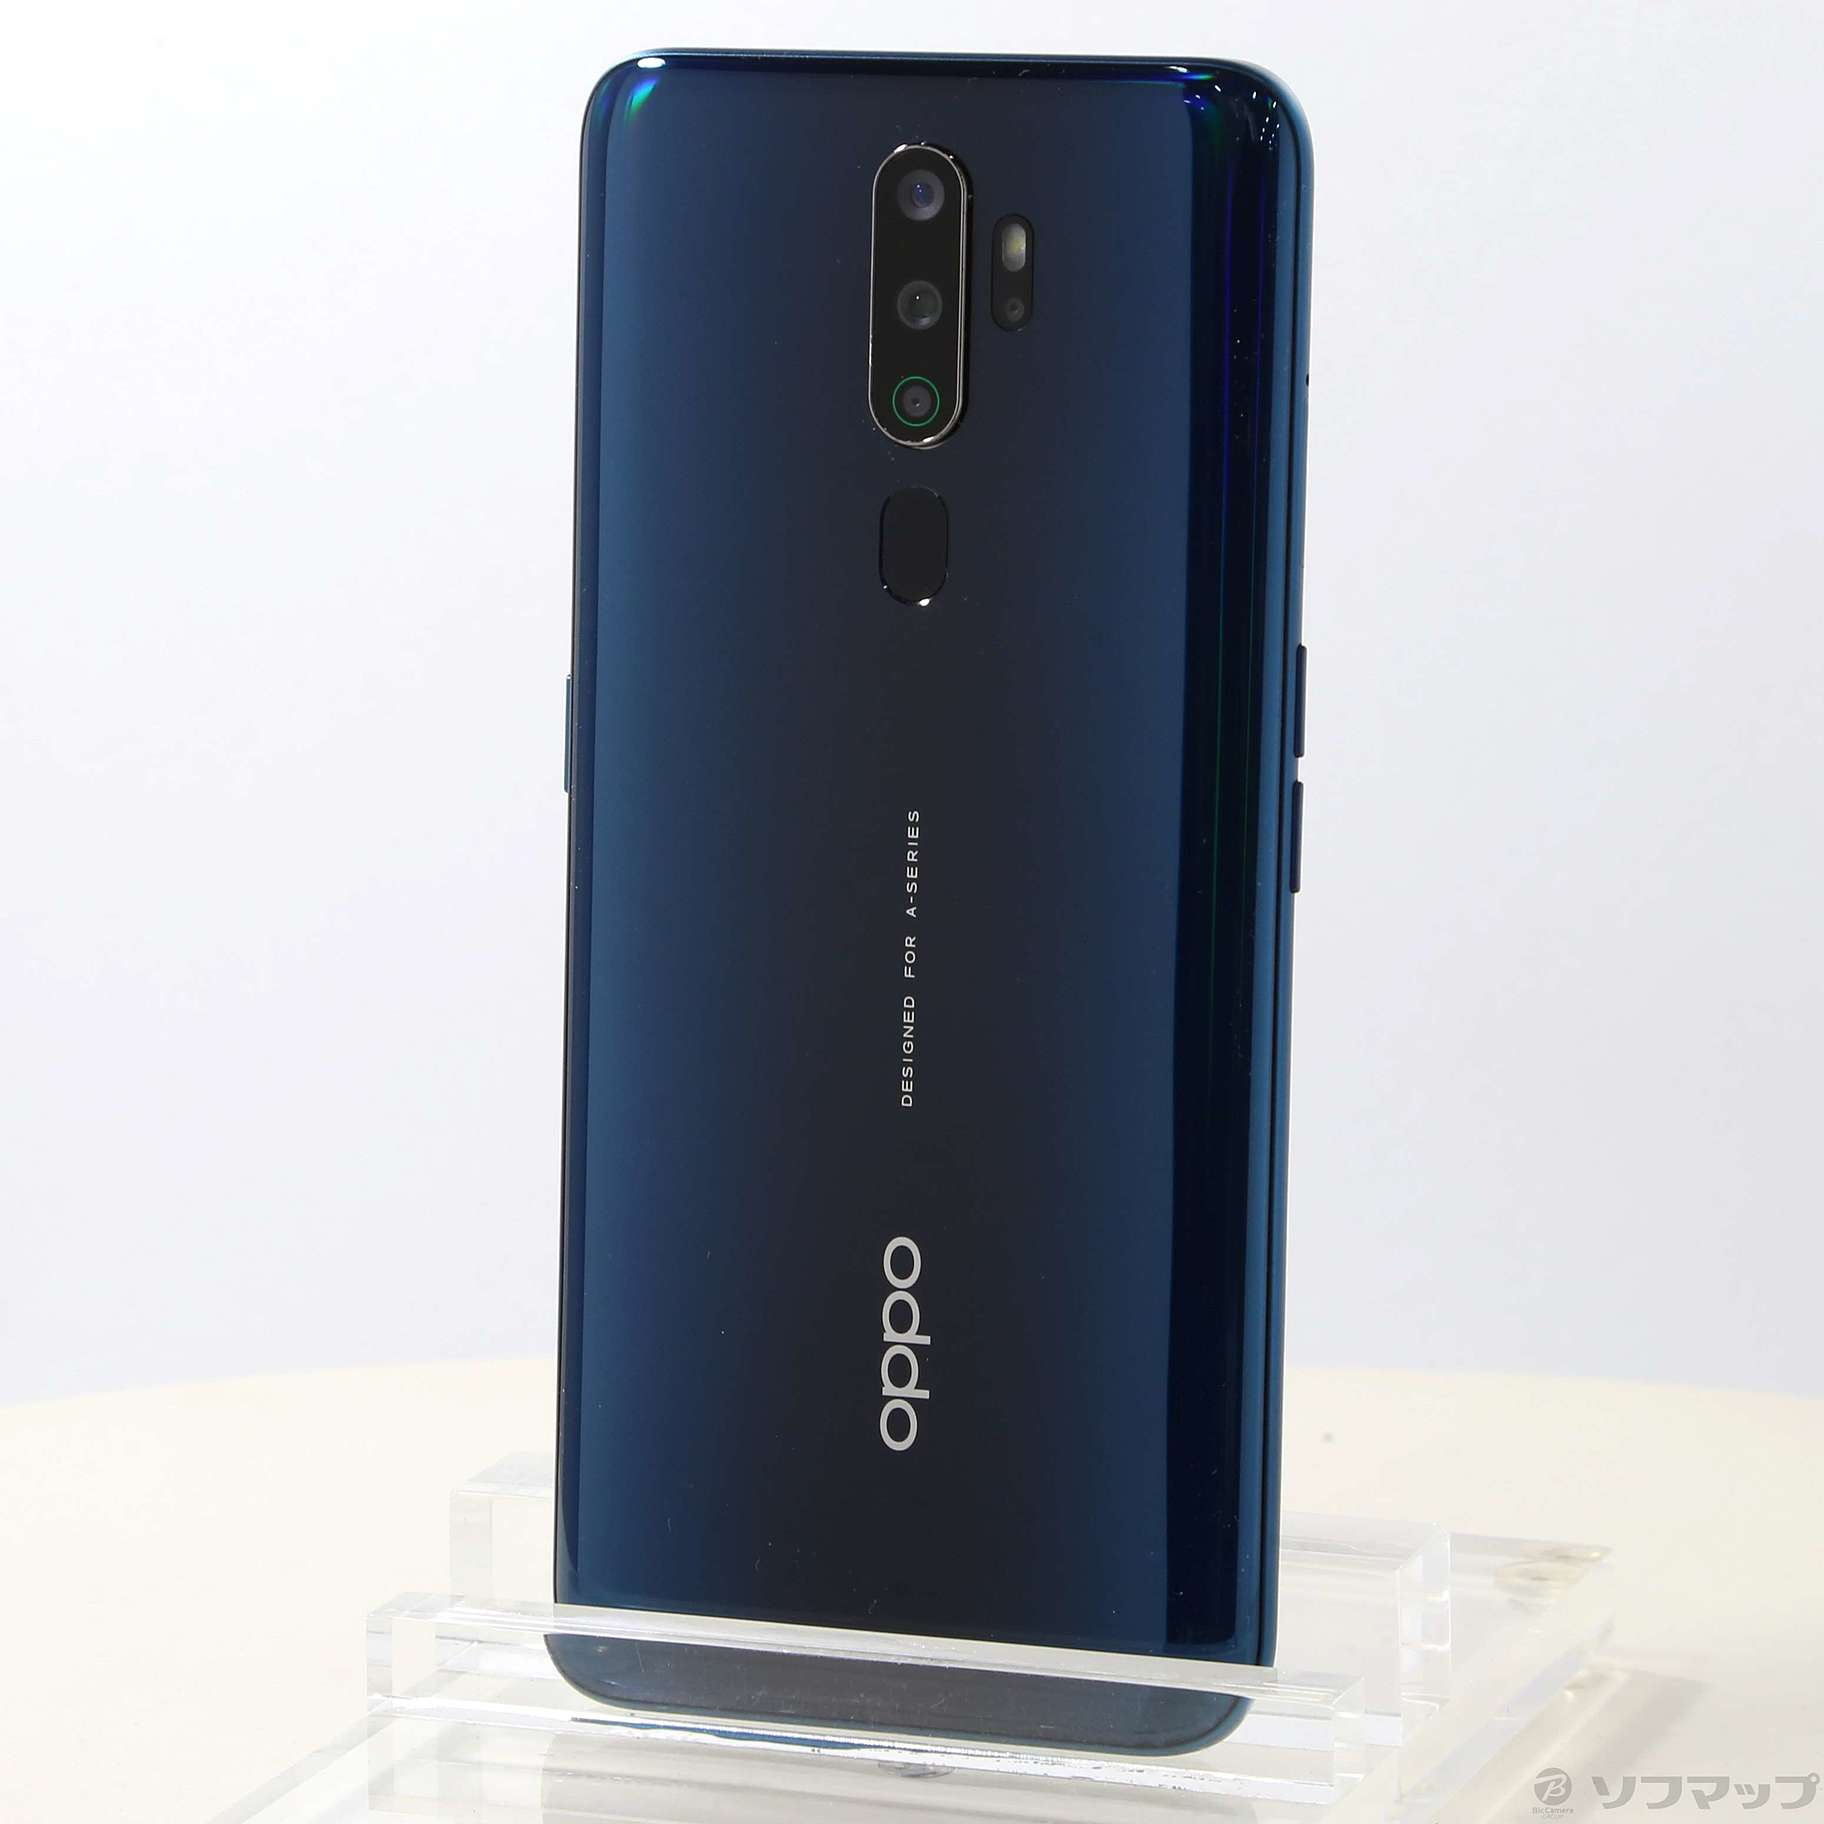 OPPO A5 2020 青 ほぼ新品